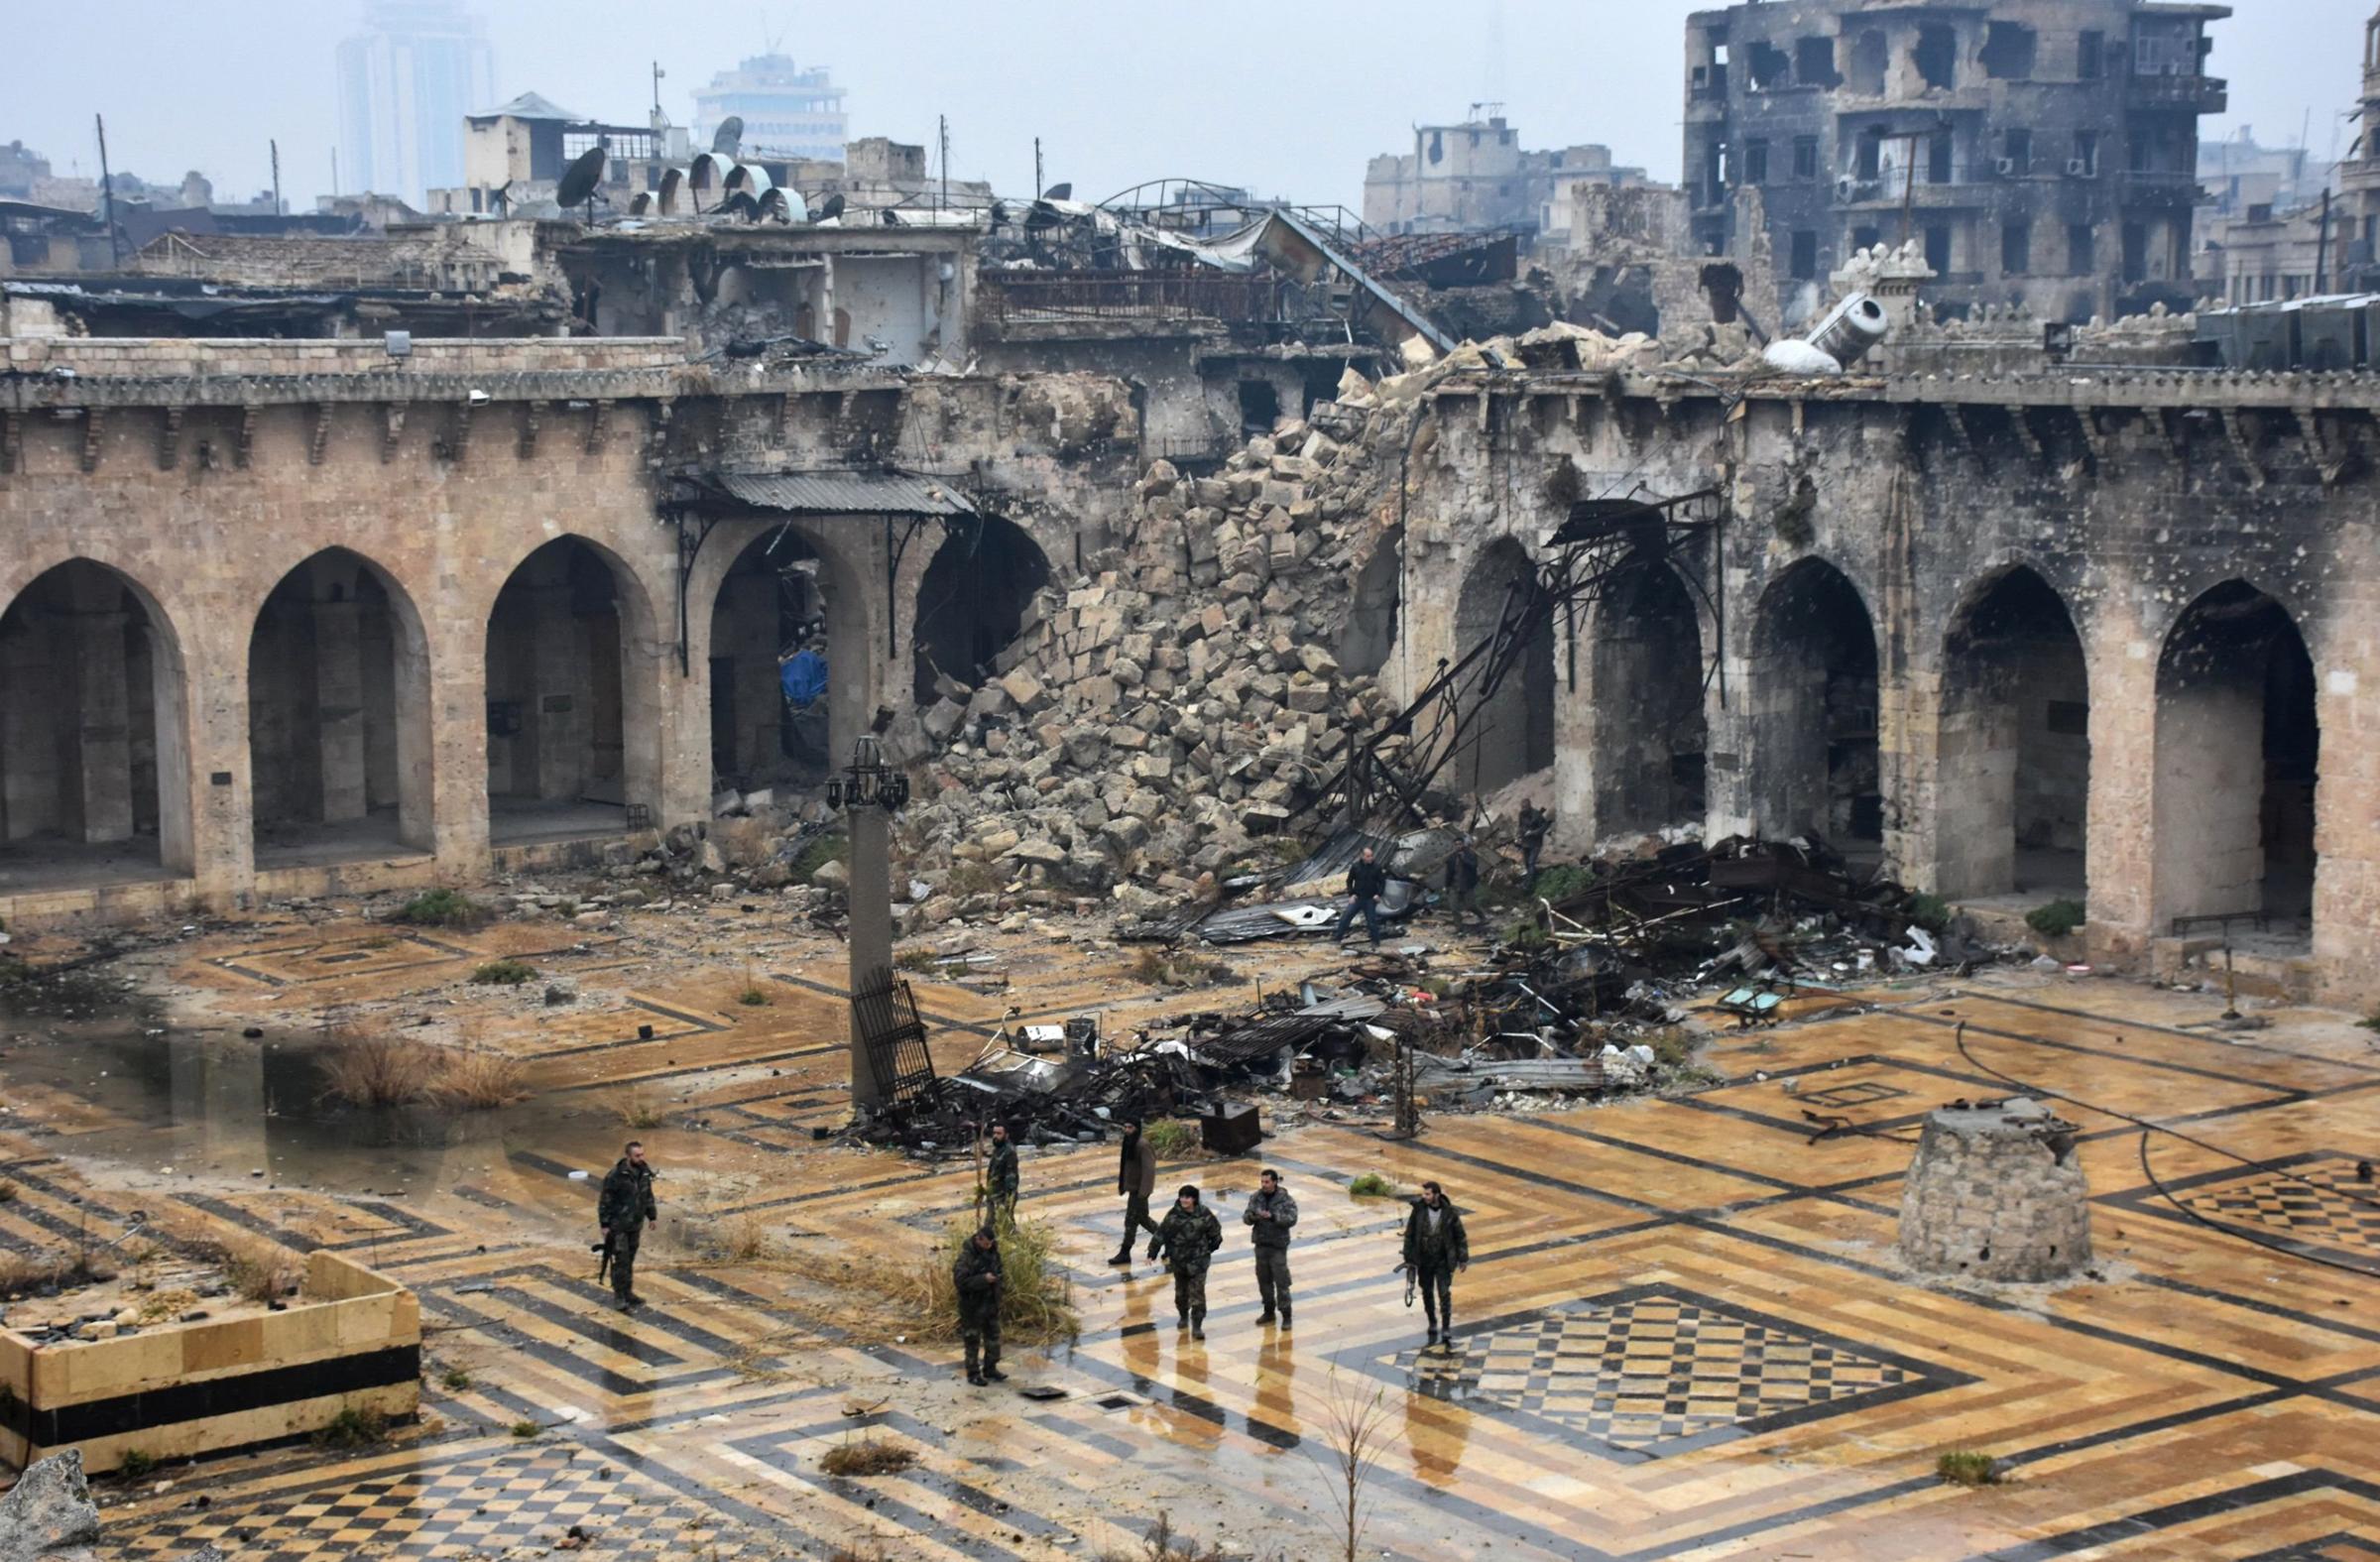 Syrian pro-government forces walk in the ancient Umayyad mosque in Aleppo after they captured the area on Dec. 13, 2016.